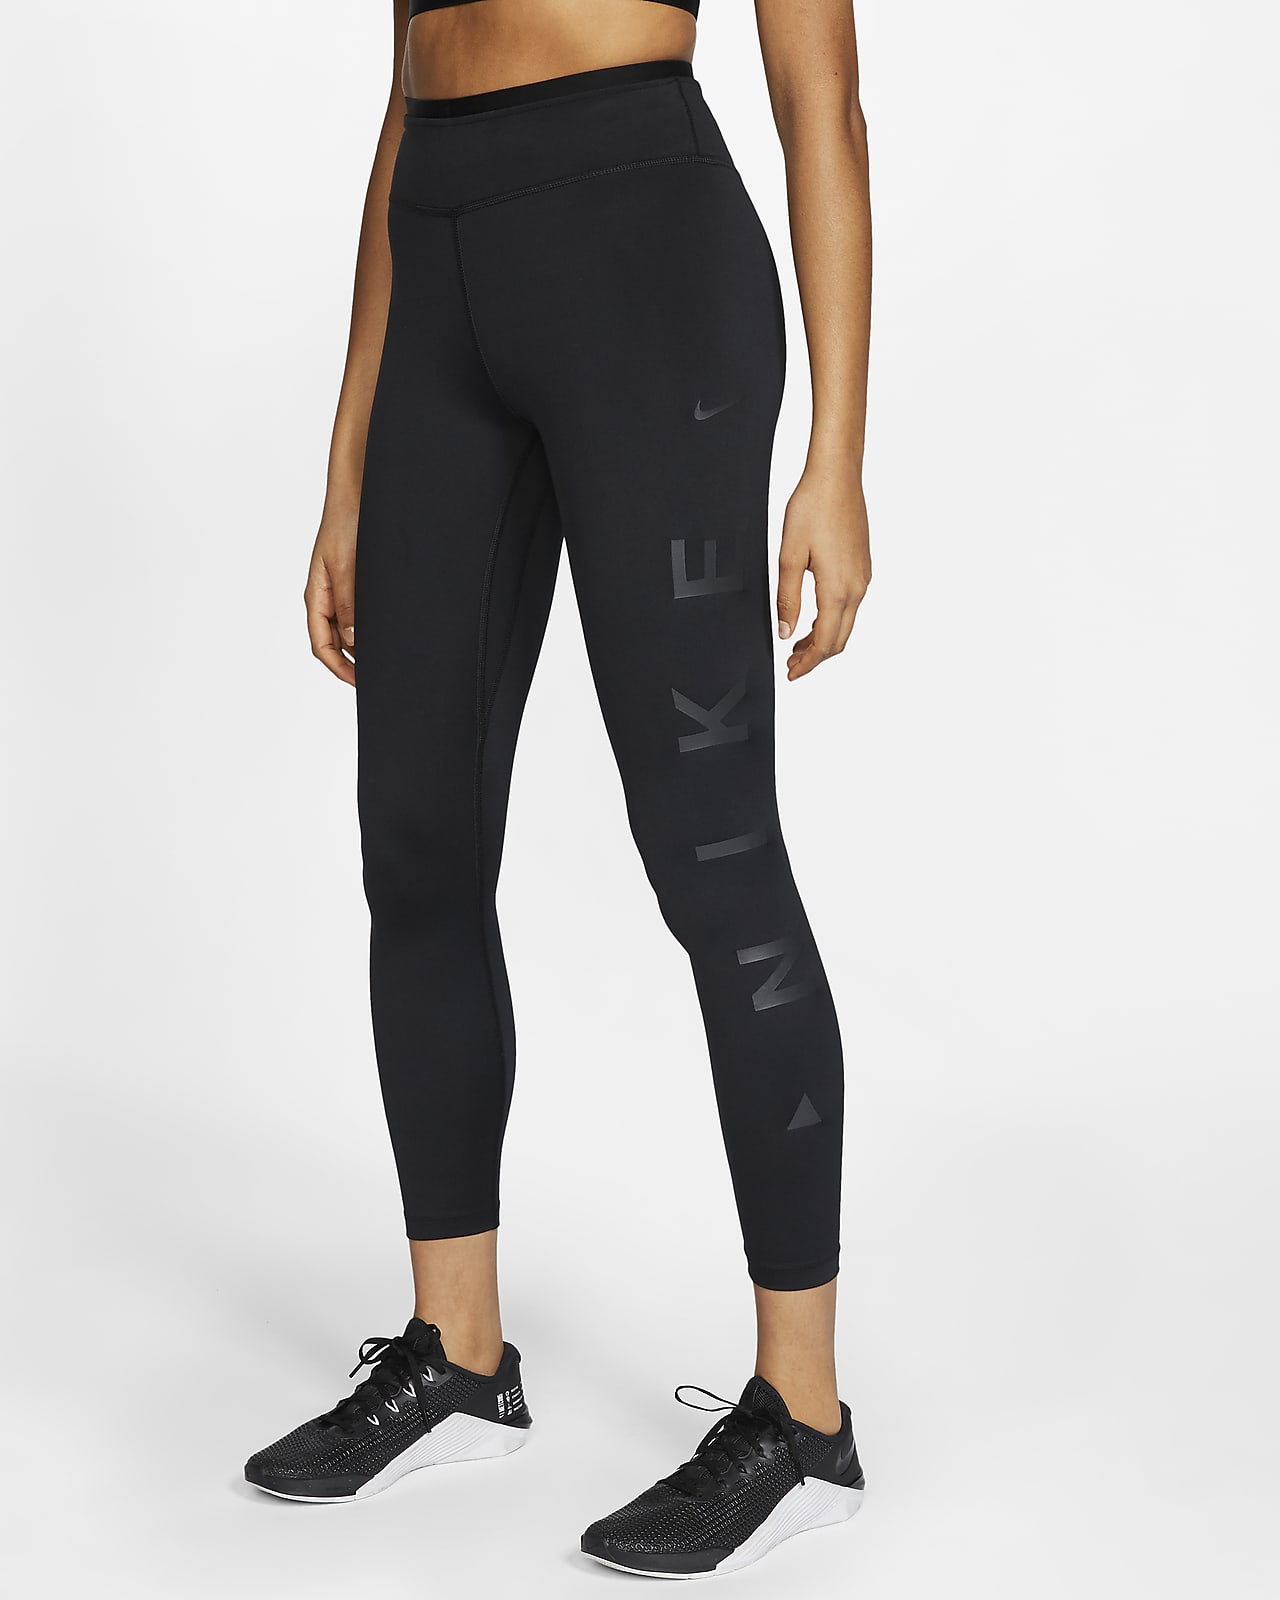 Nike One Icon Clash Women's Graphic 7/8 Tights. Nike JP